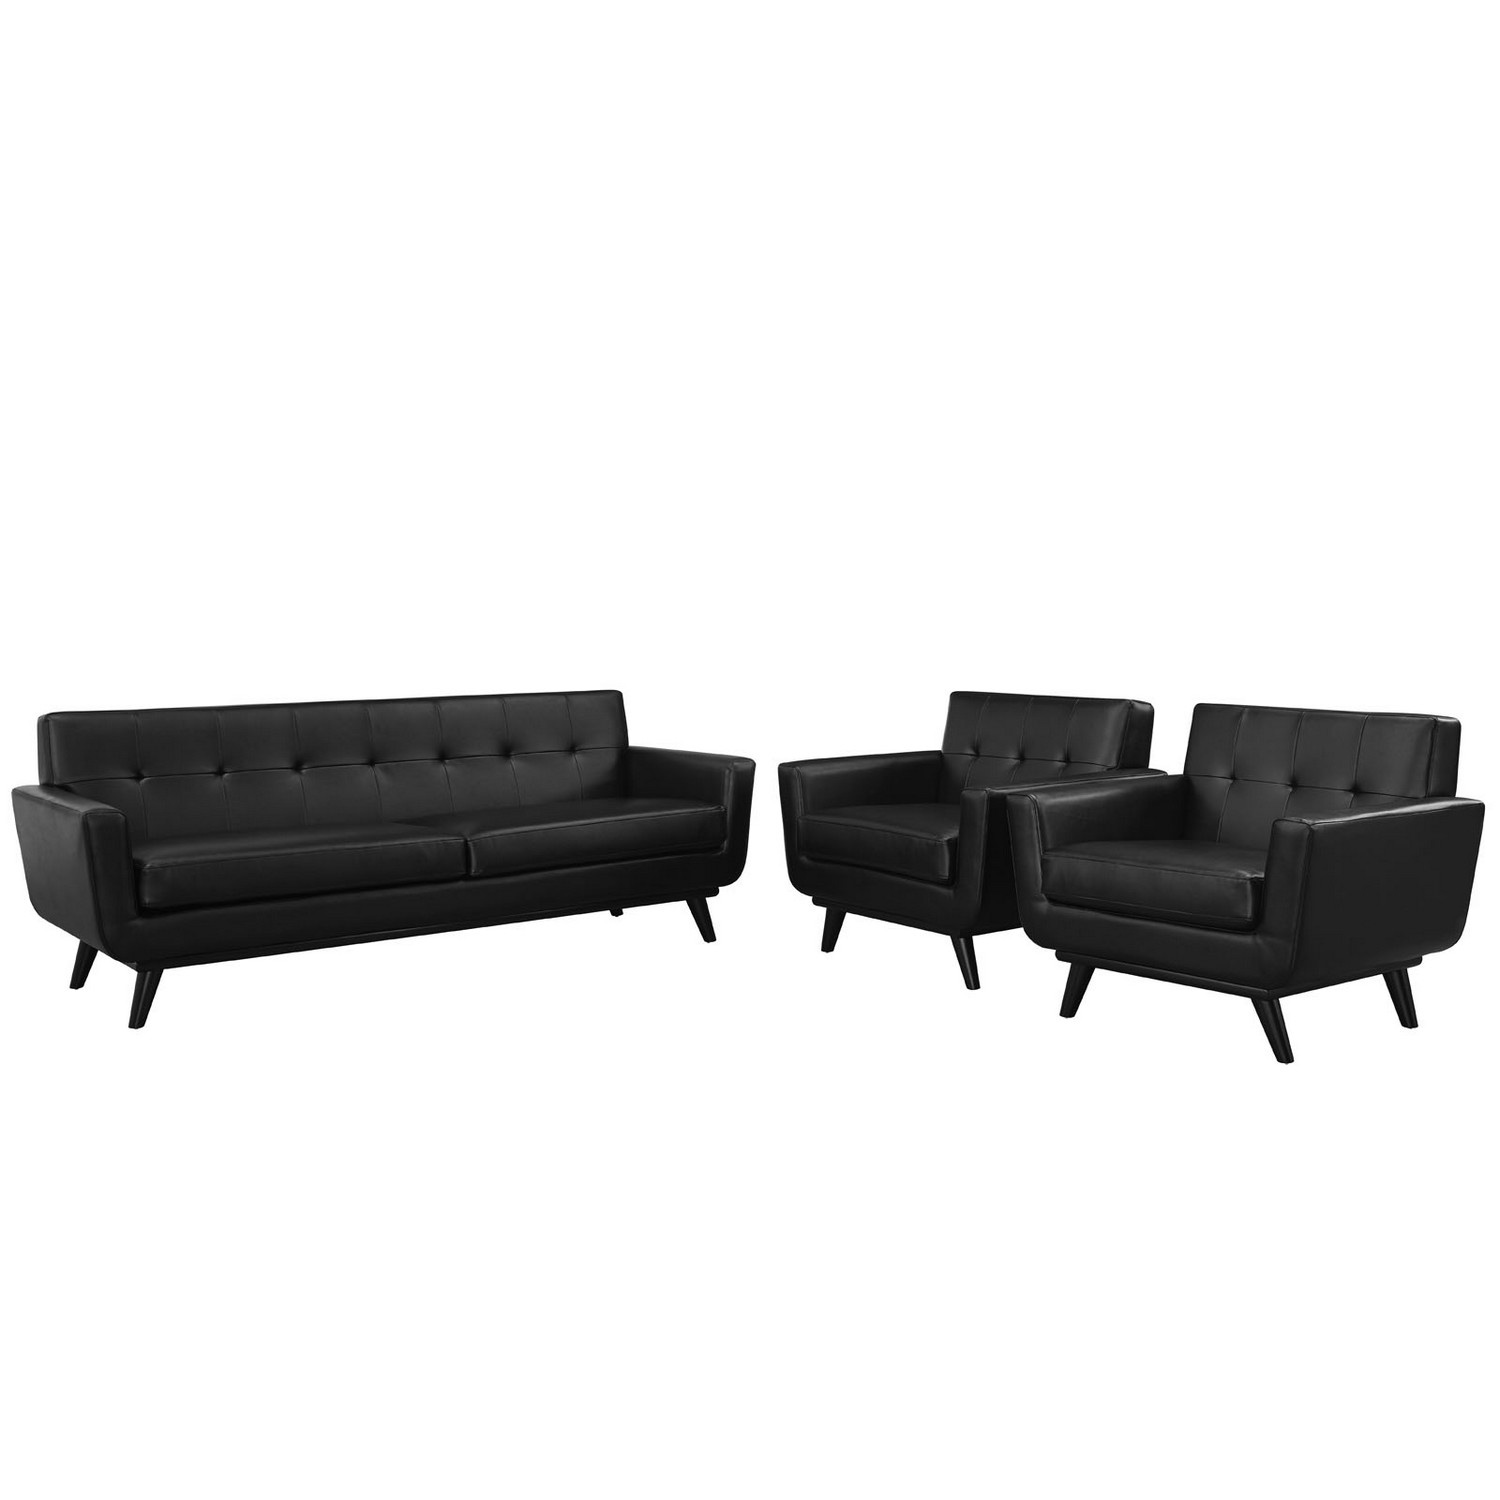 Modway Engage 3 Piece Leather Living Room Set - Black